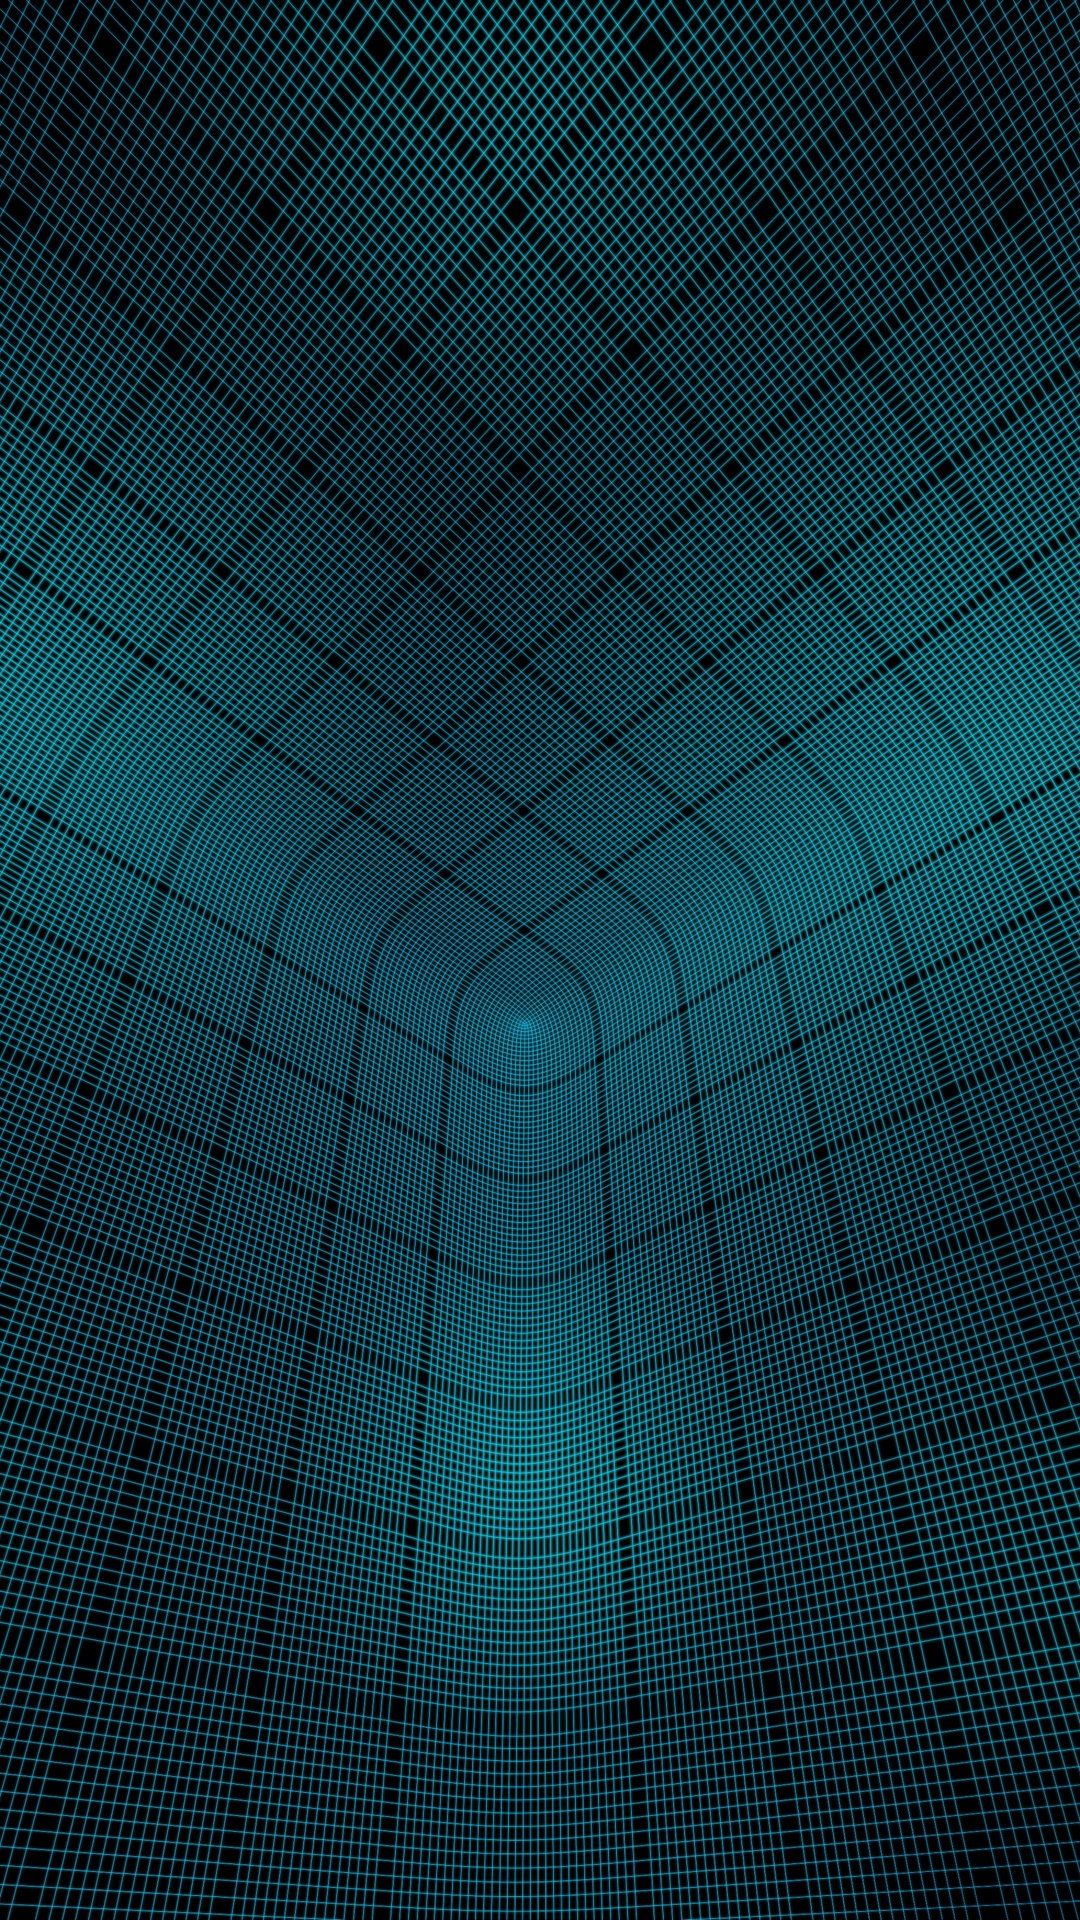 Illusion Iphone Wallpapers